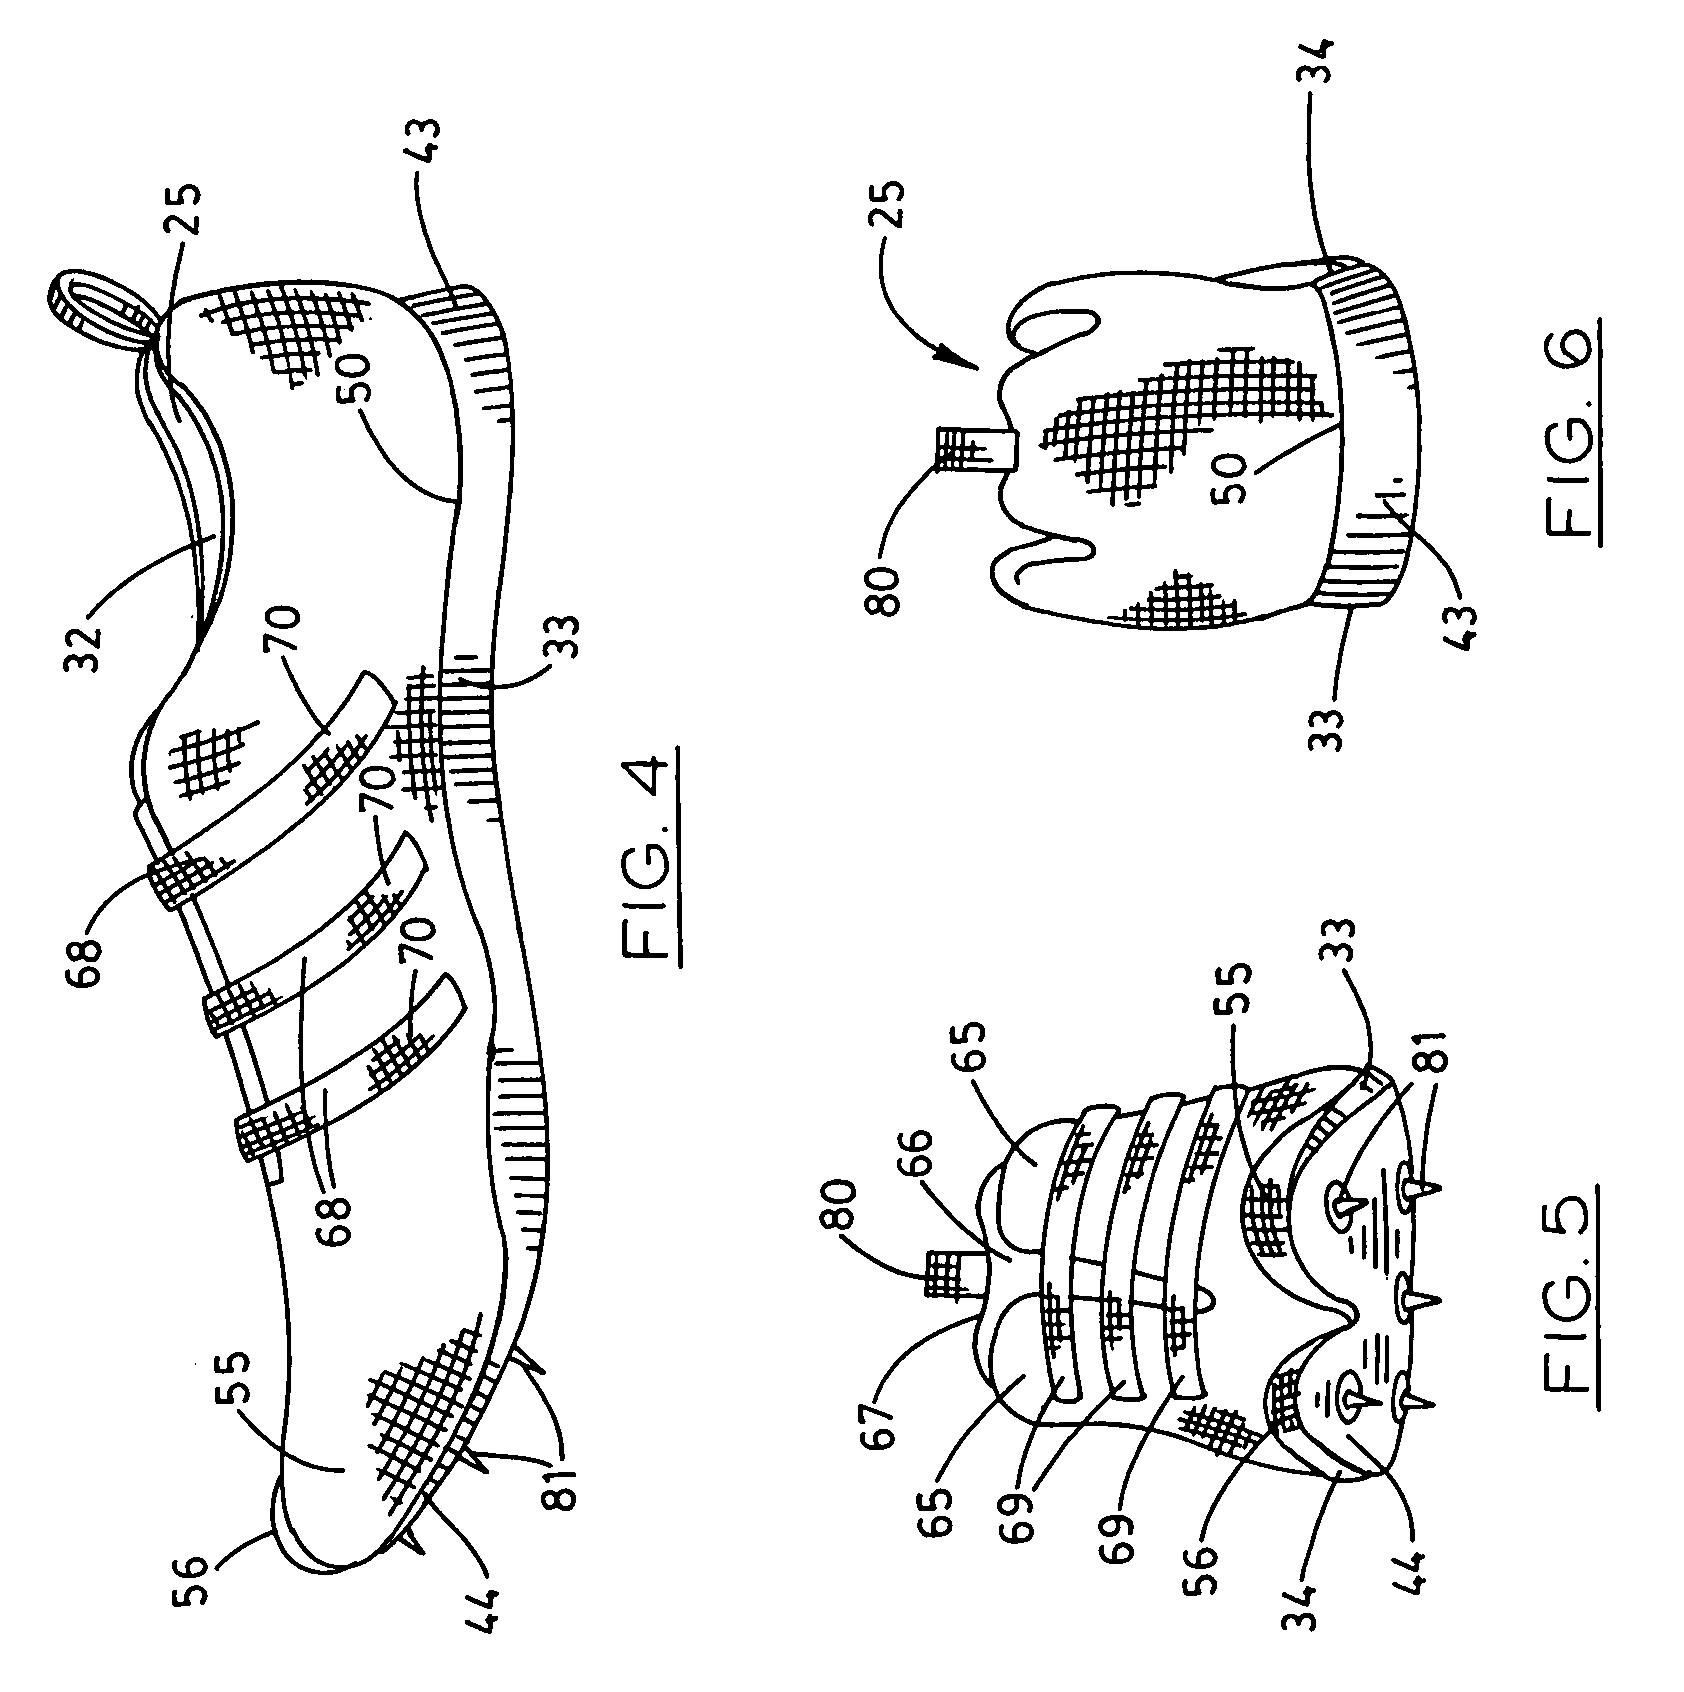 Apparatus for use in footwear and the like